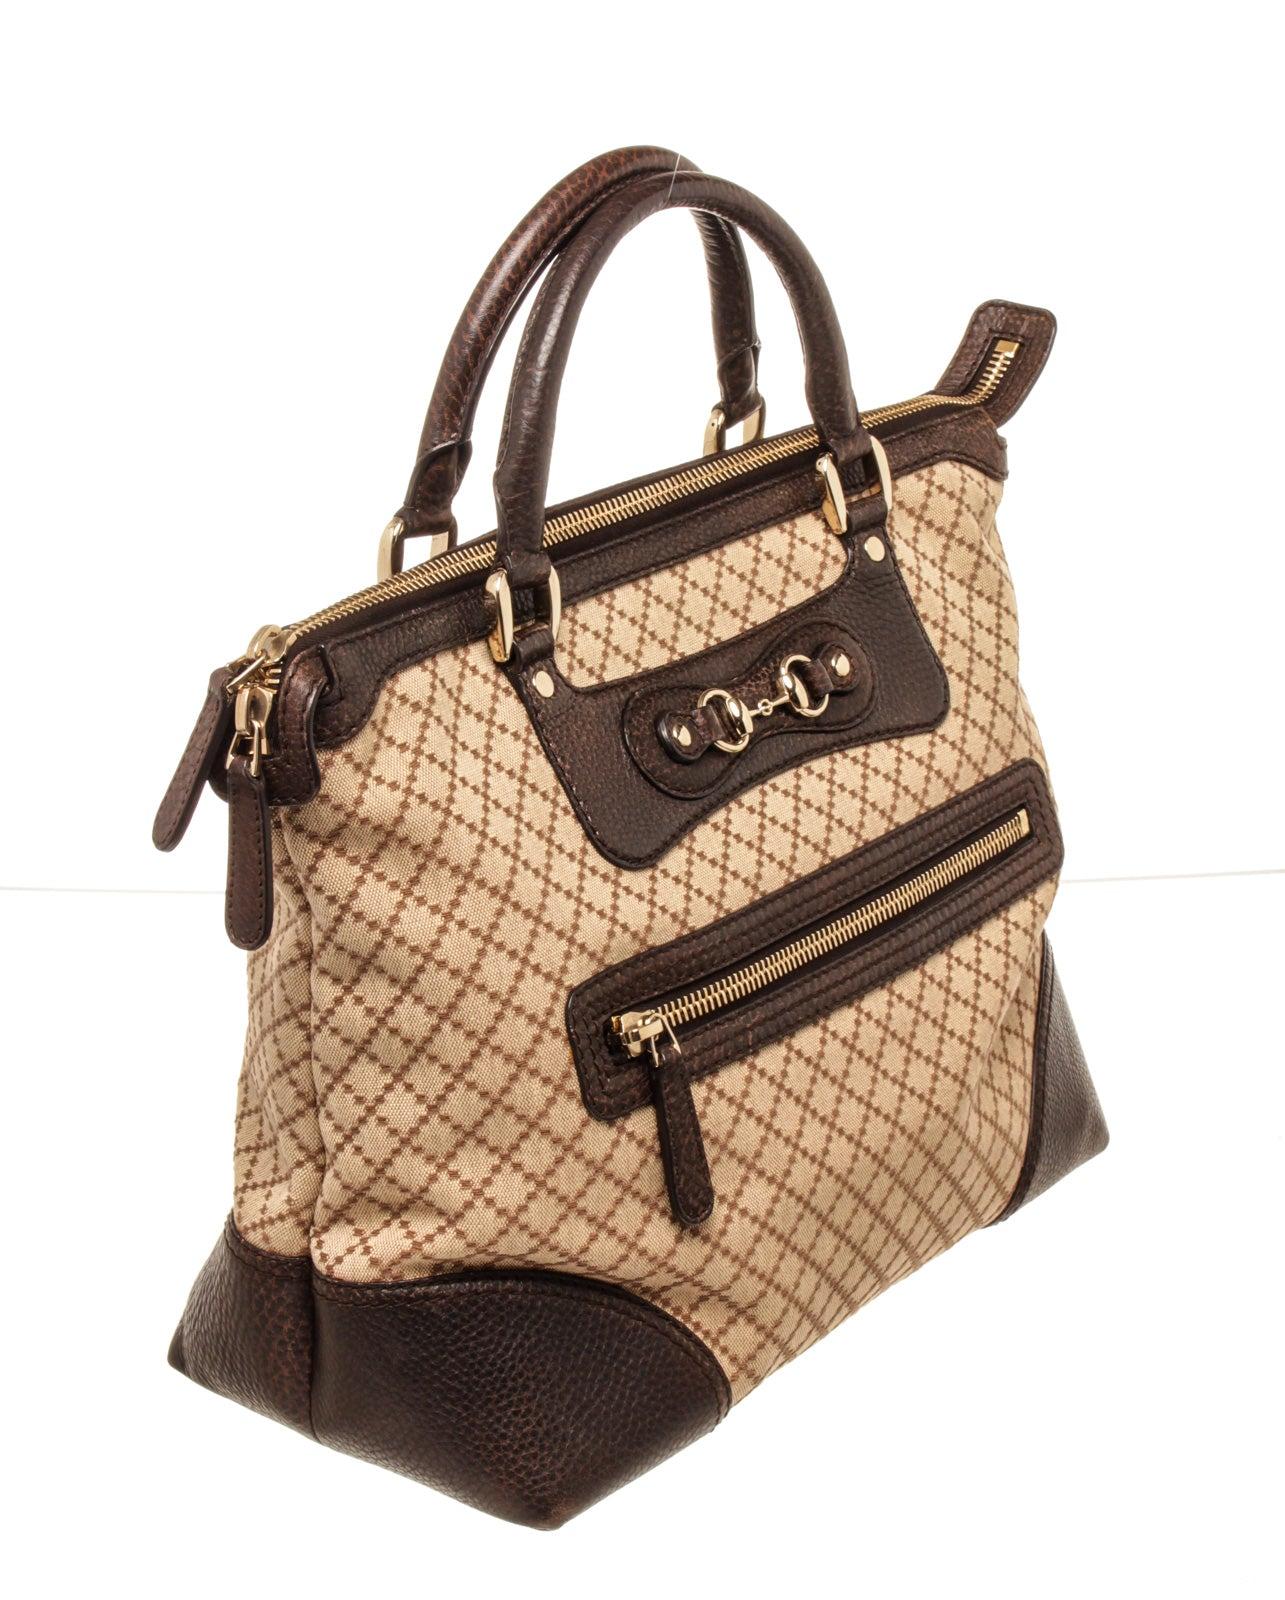 Gucci Brown Leather Catherine Tote Bag. Features green and red canvas top handles with dark brown leather grips and top zipper trim. This zipper opens to a brown fabric interior with one zipper pocket and one slip pocket,
44875MSC